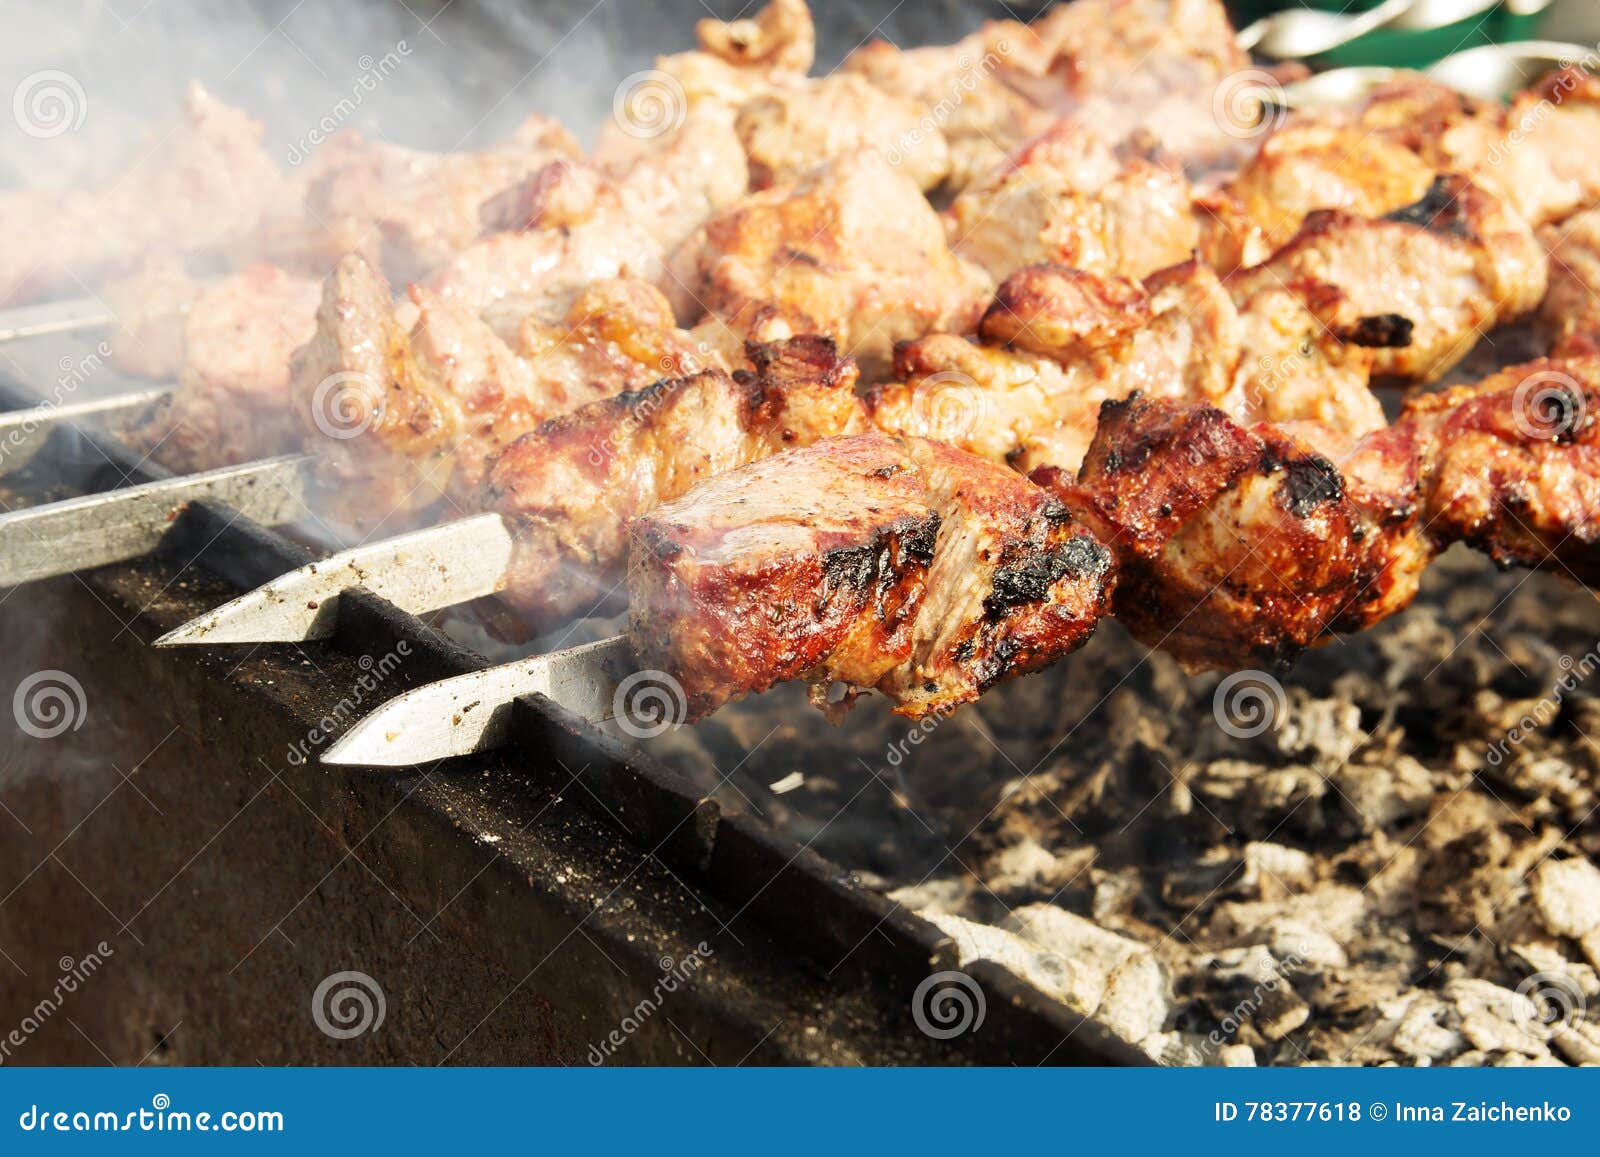 Meat roasted on skewers stock photo. Image of american - 78377618